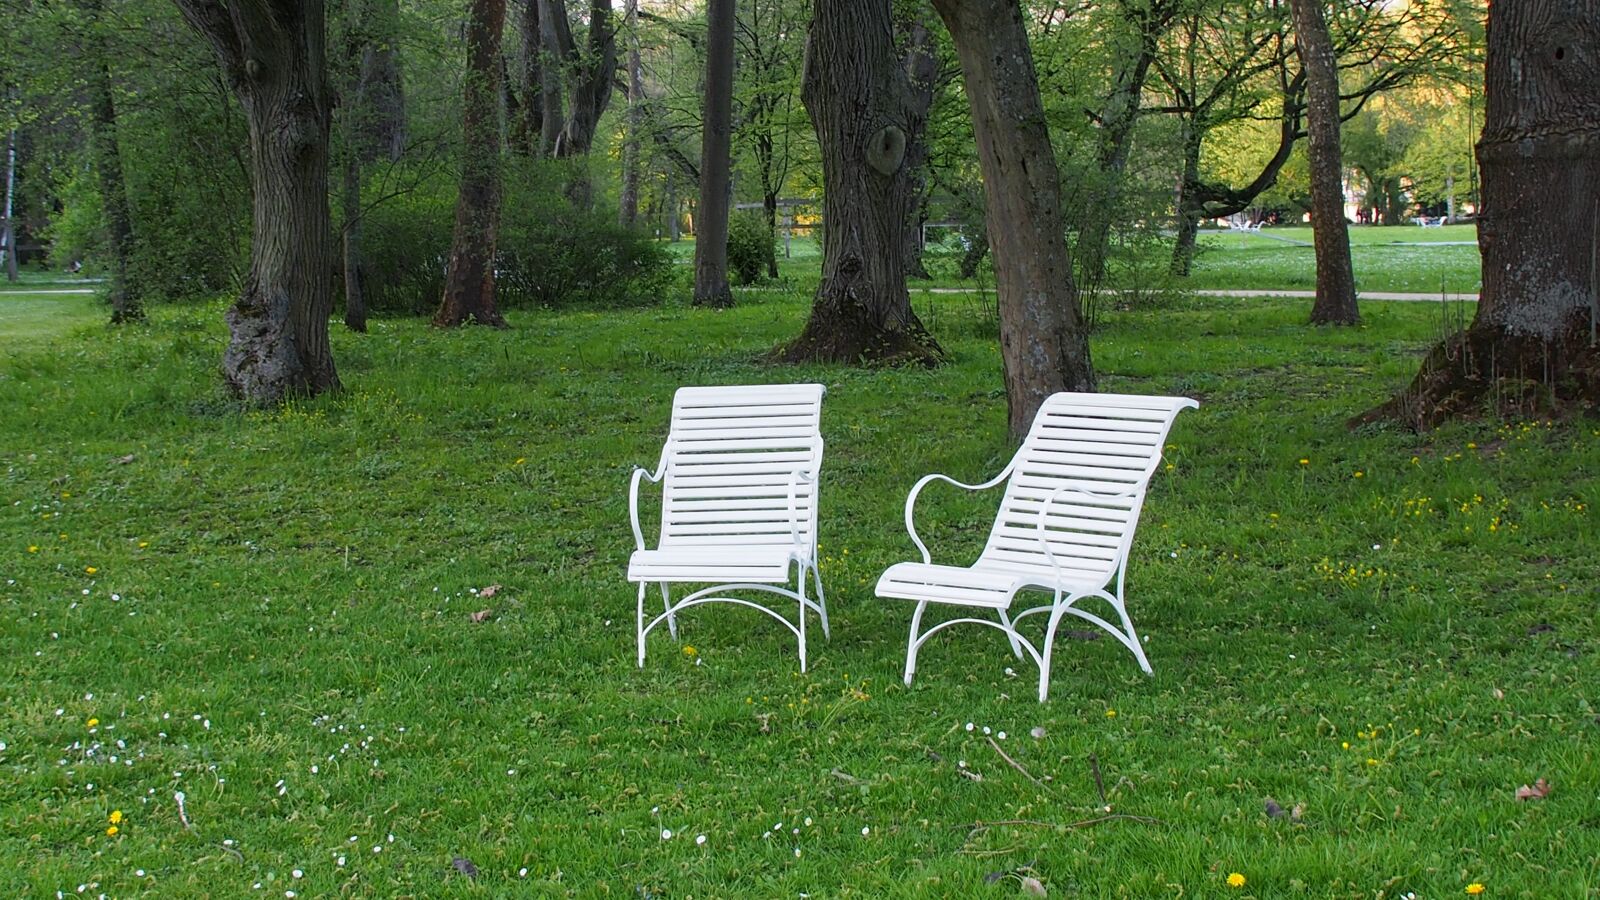 Olympus PEN E-PL5 sample photo. Chairs, park, nature photography